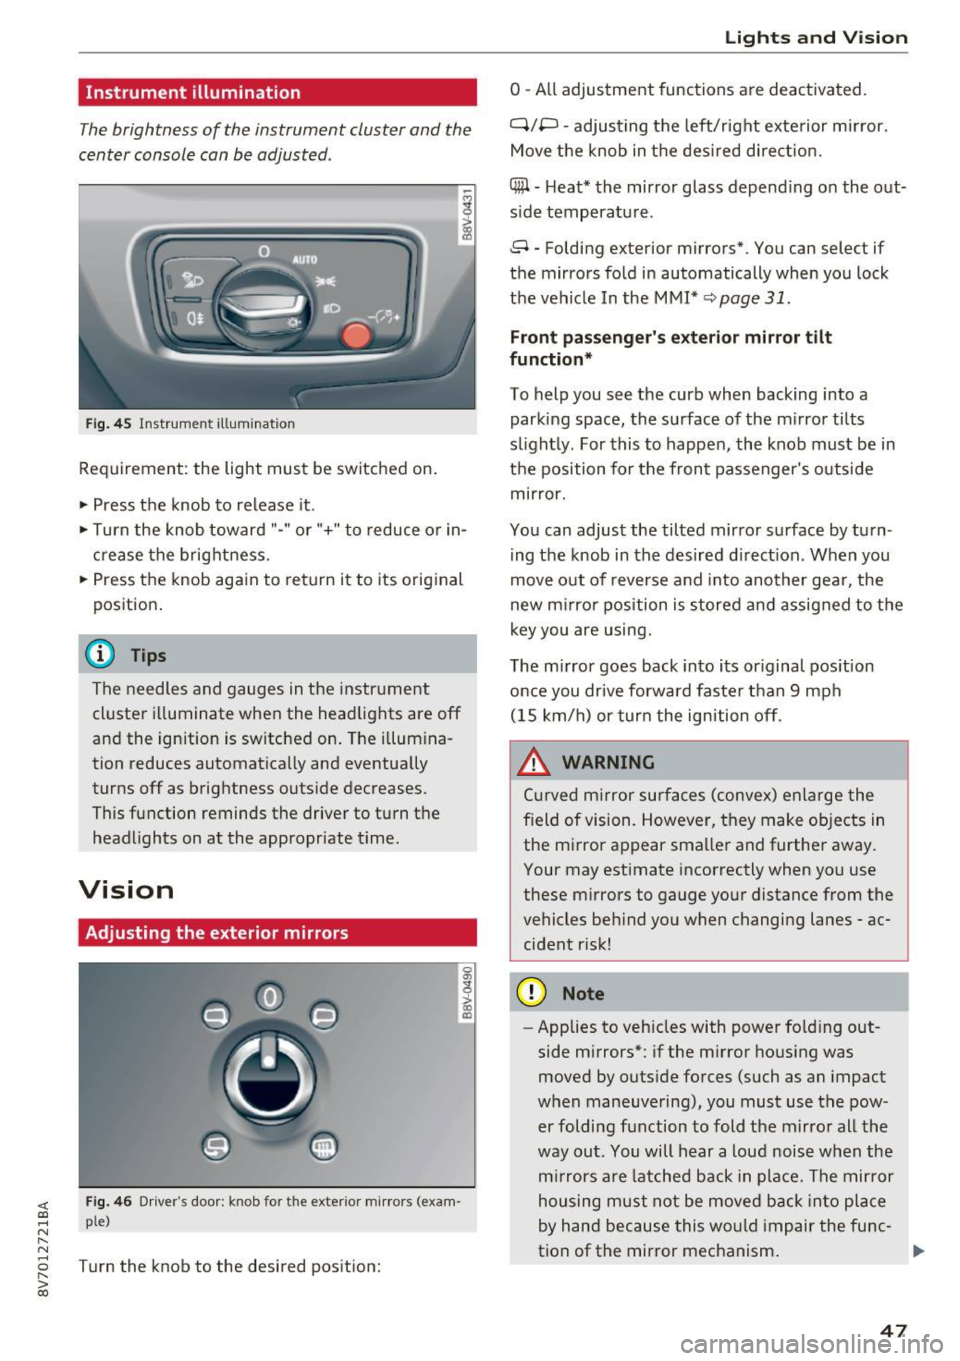 AUDI A3 CABRIOLET 2016 Service Manual <( co ..... N 
" N ..... 0 r--. > 00 
Instrument  illumination 
The brightness  of  the  instrument  cluster  and  the 
center  console can be adjusted . 
Fig. 45  Instrumellt  illumination 
Requirem